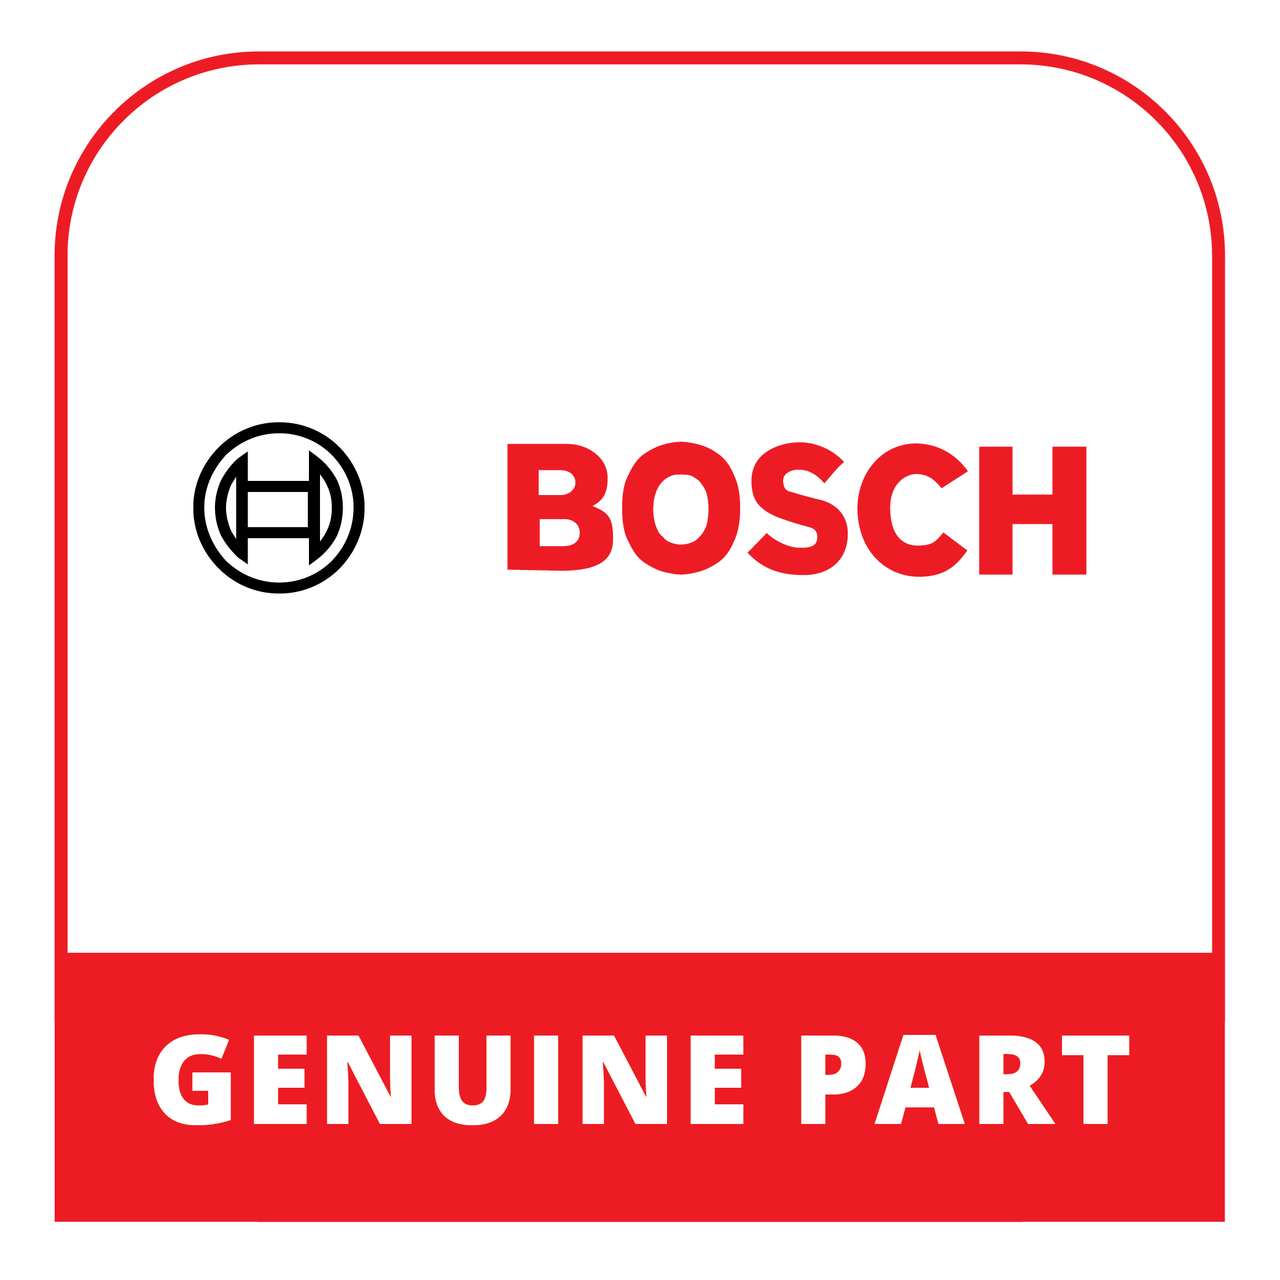 Bosch (Thermador) 20002545 - Basket 3Rd Level - Genuine Bosch (Thermador) Part